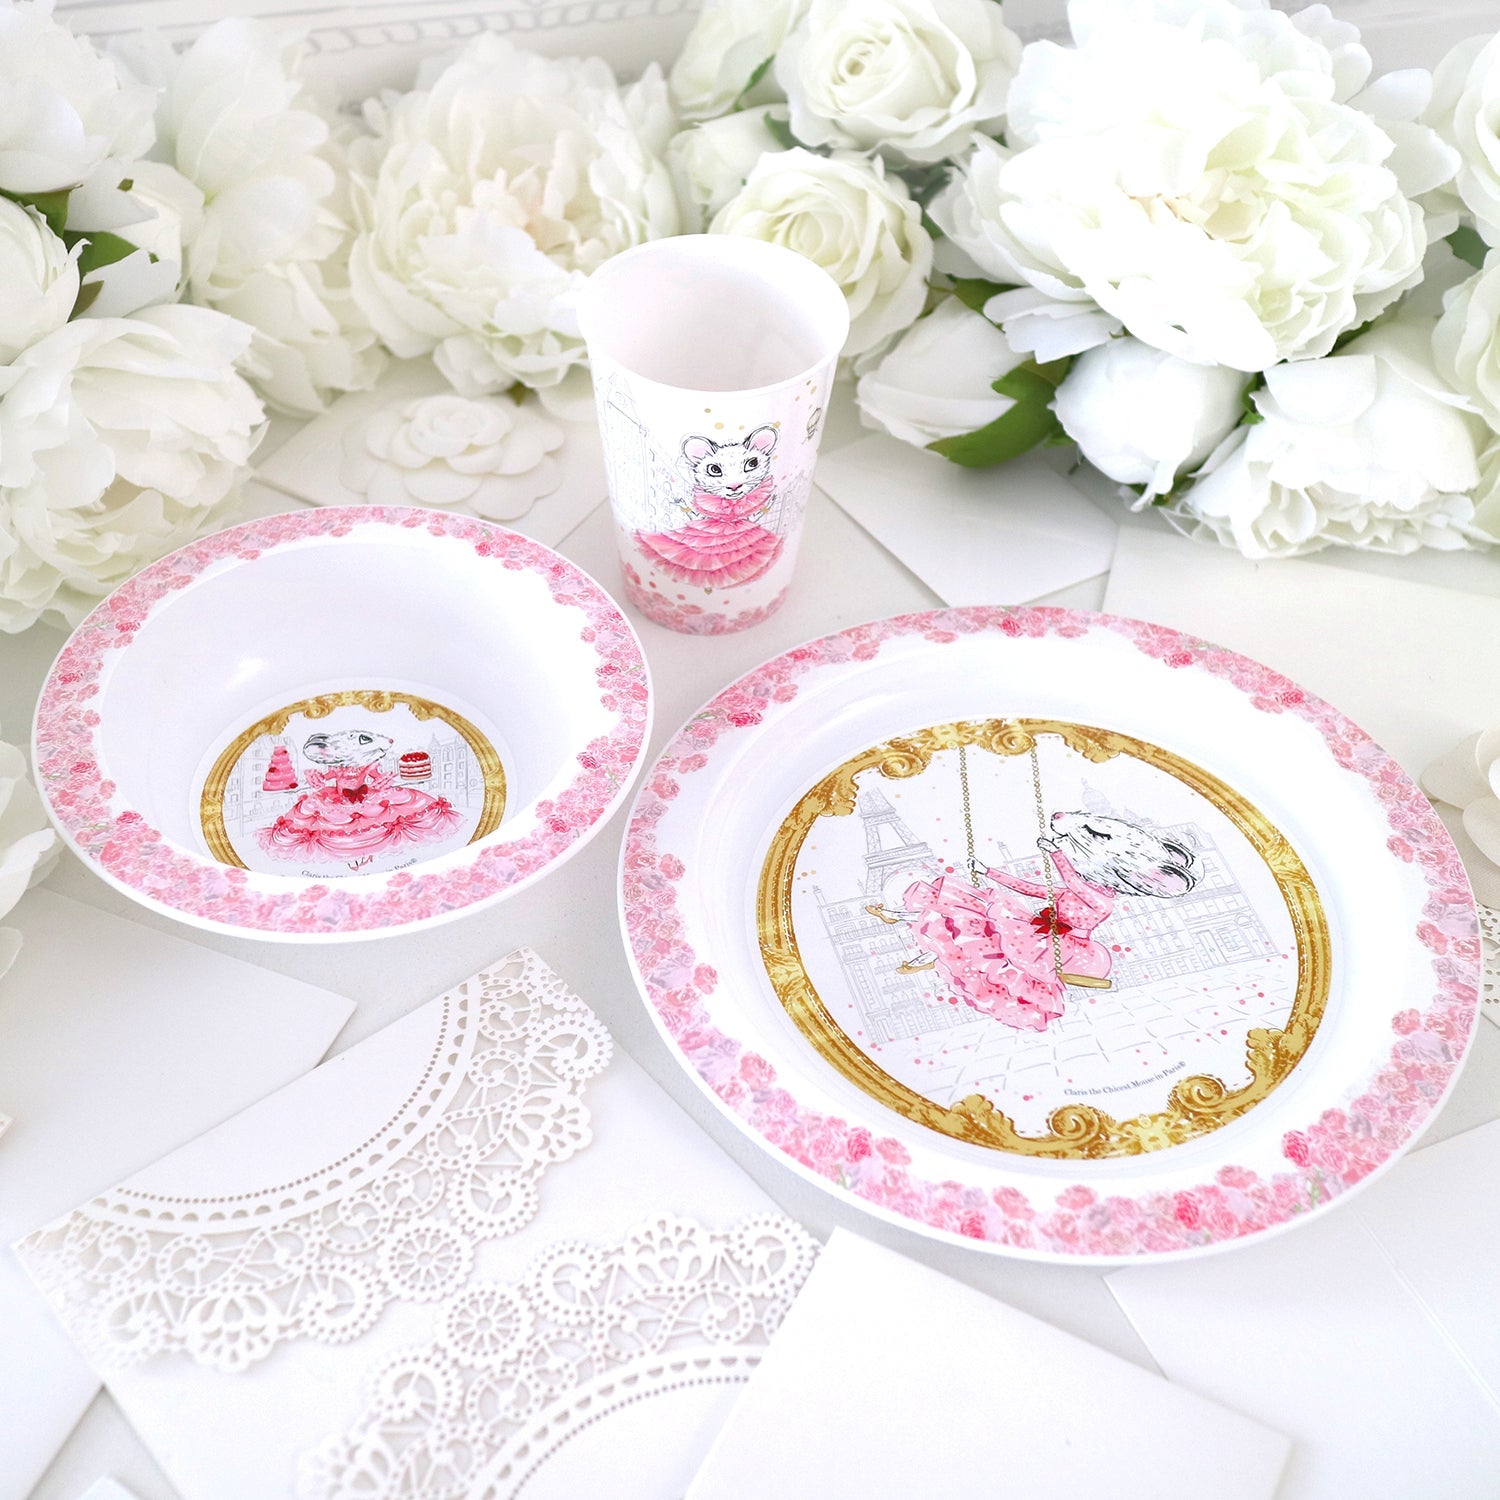 Claris Mealtime Dinner Set - Toybox Tales